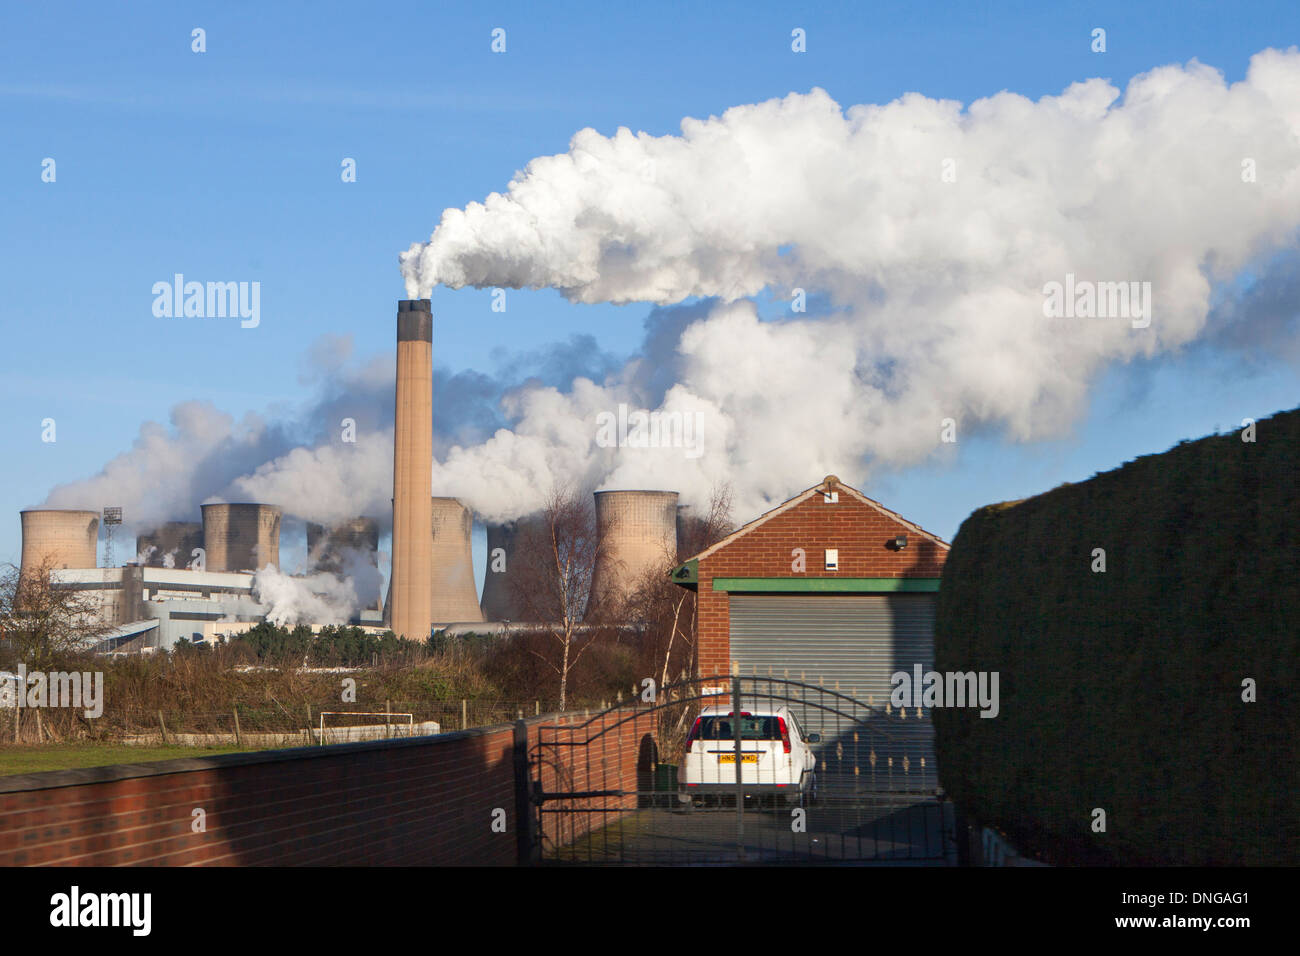 Eggborough Power Station a large coal fired power station in North Yorkshire, England bellowing smoke into the sky behind a home Stock Photo